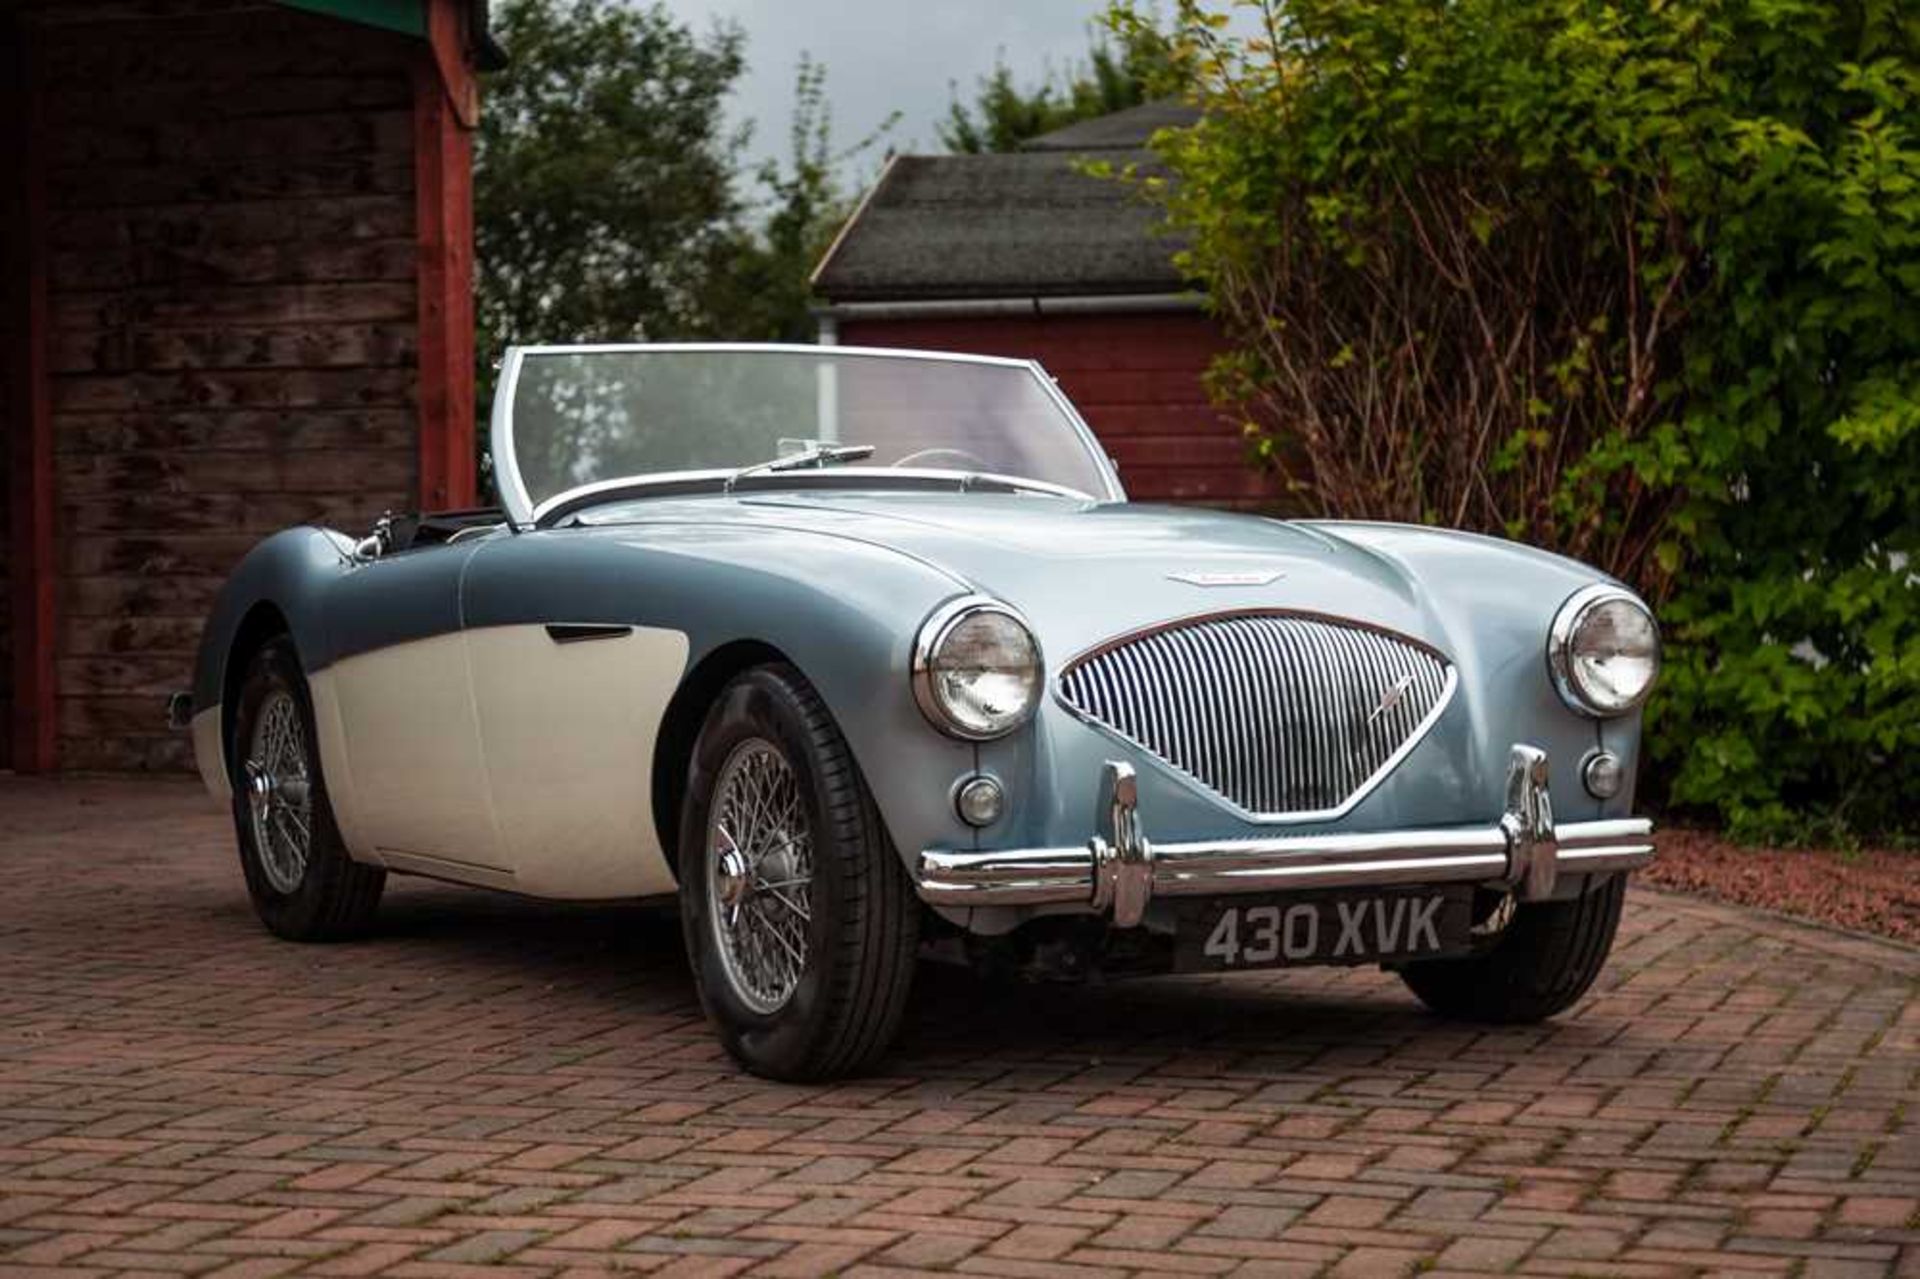 1955 Austin-Healey 100/4 Subtly Upgraded with 5-Speed Transmission and Front Disc Brakes - Image 3 of 54